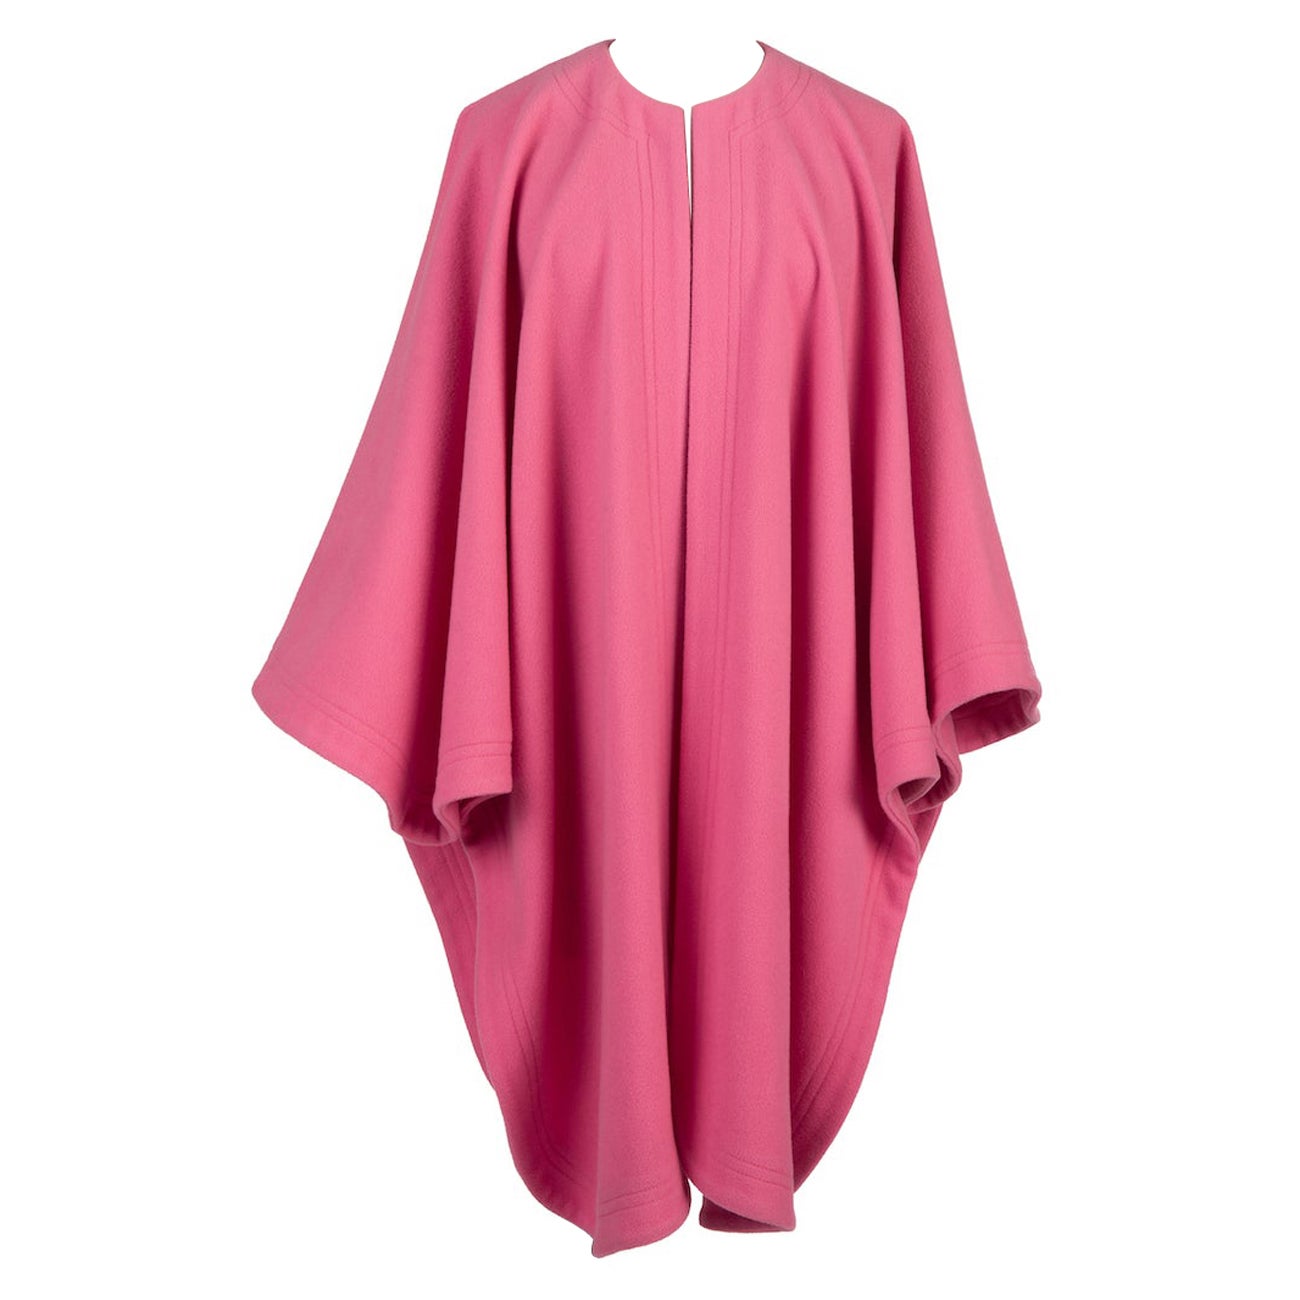 YVES SAINT LAURENT YSL Pink Pure Wool Cape or Wrap, 1980s